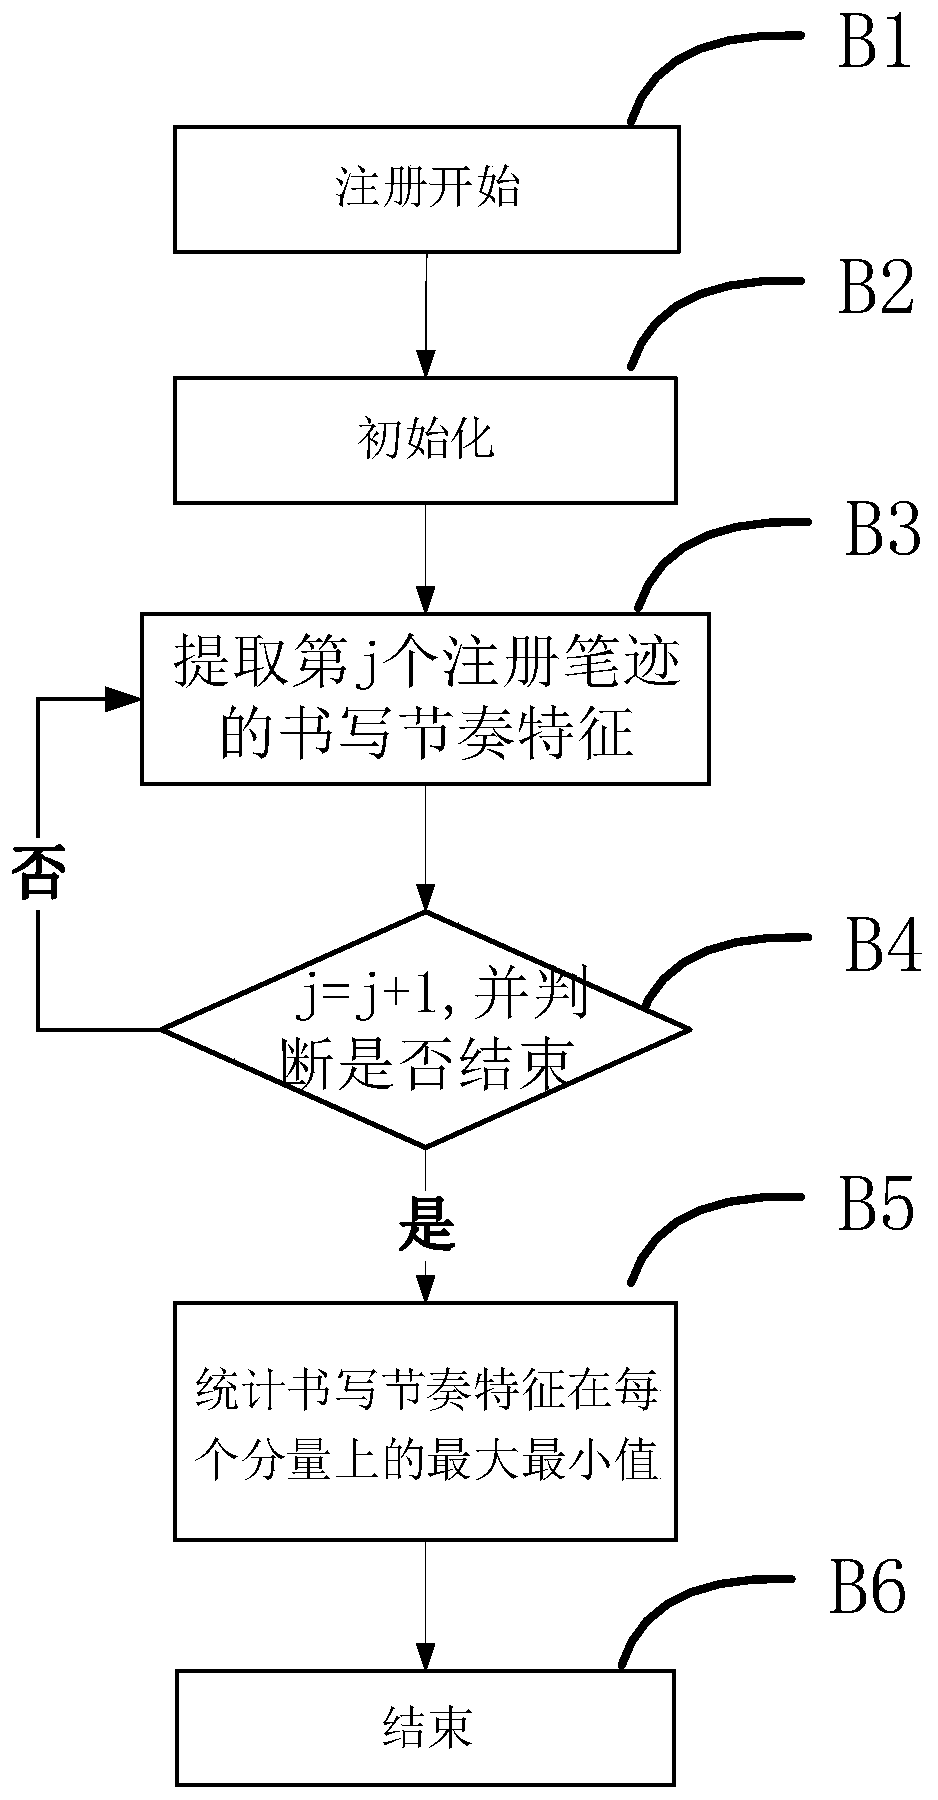 Writing rhythm feature extraction and authentication method in online handwriting authentication